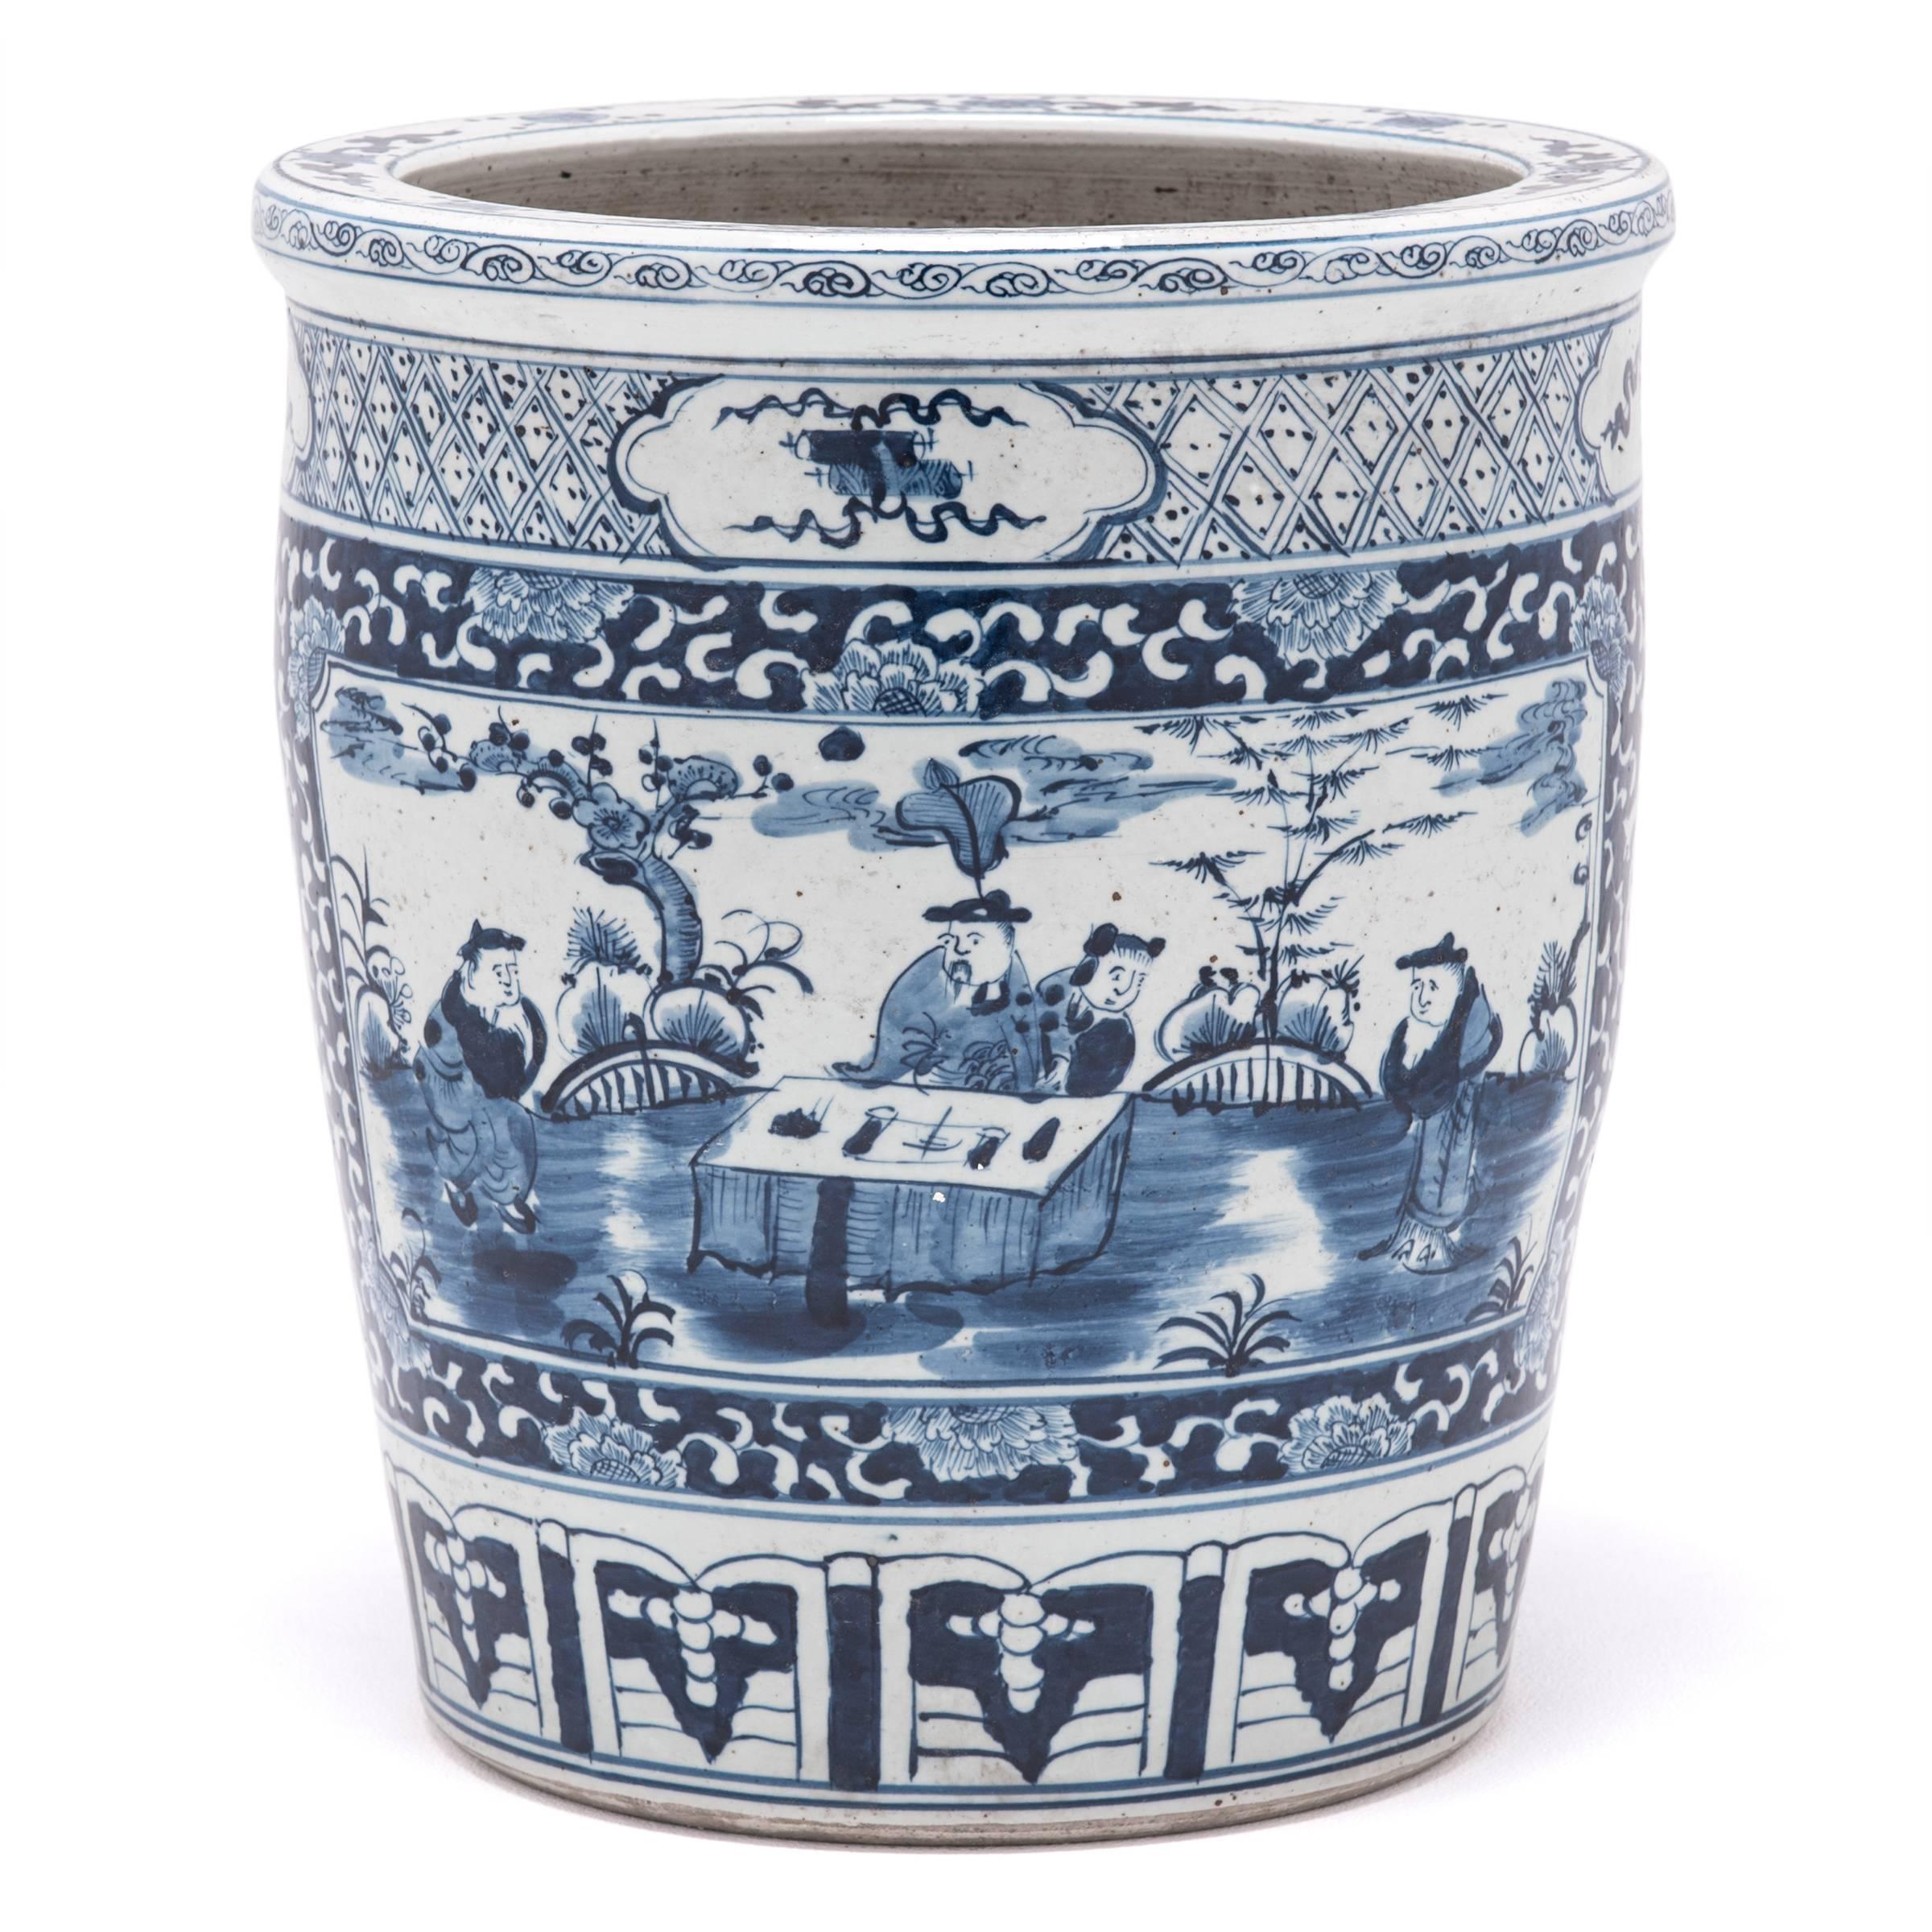 Glazed Chinese Blue and White Scholars' Scroll Jar